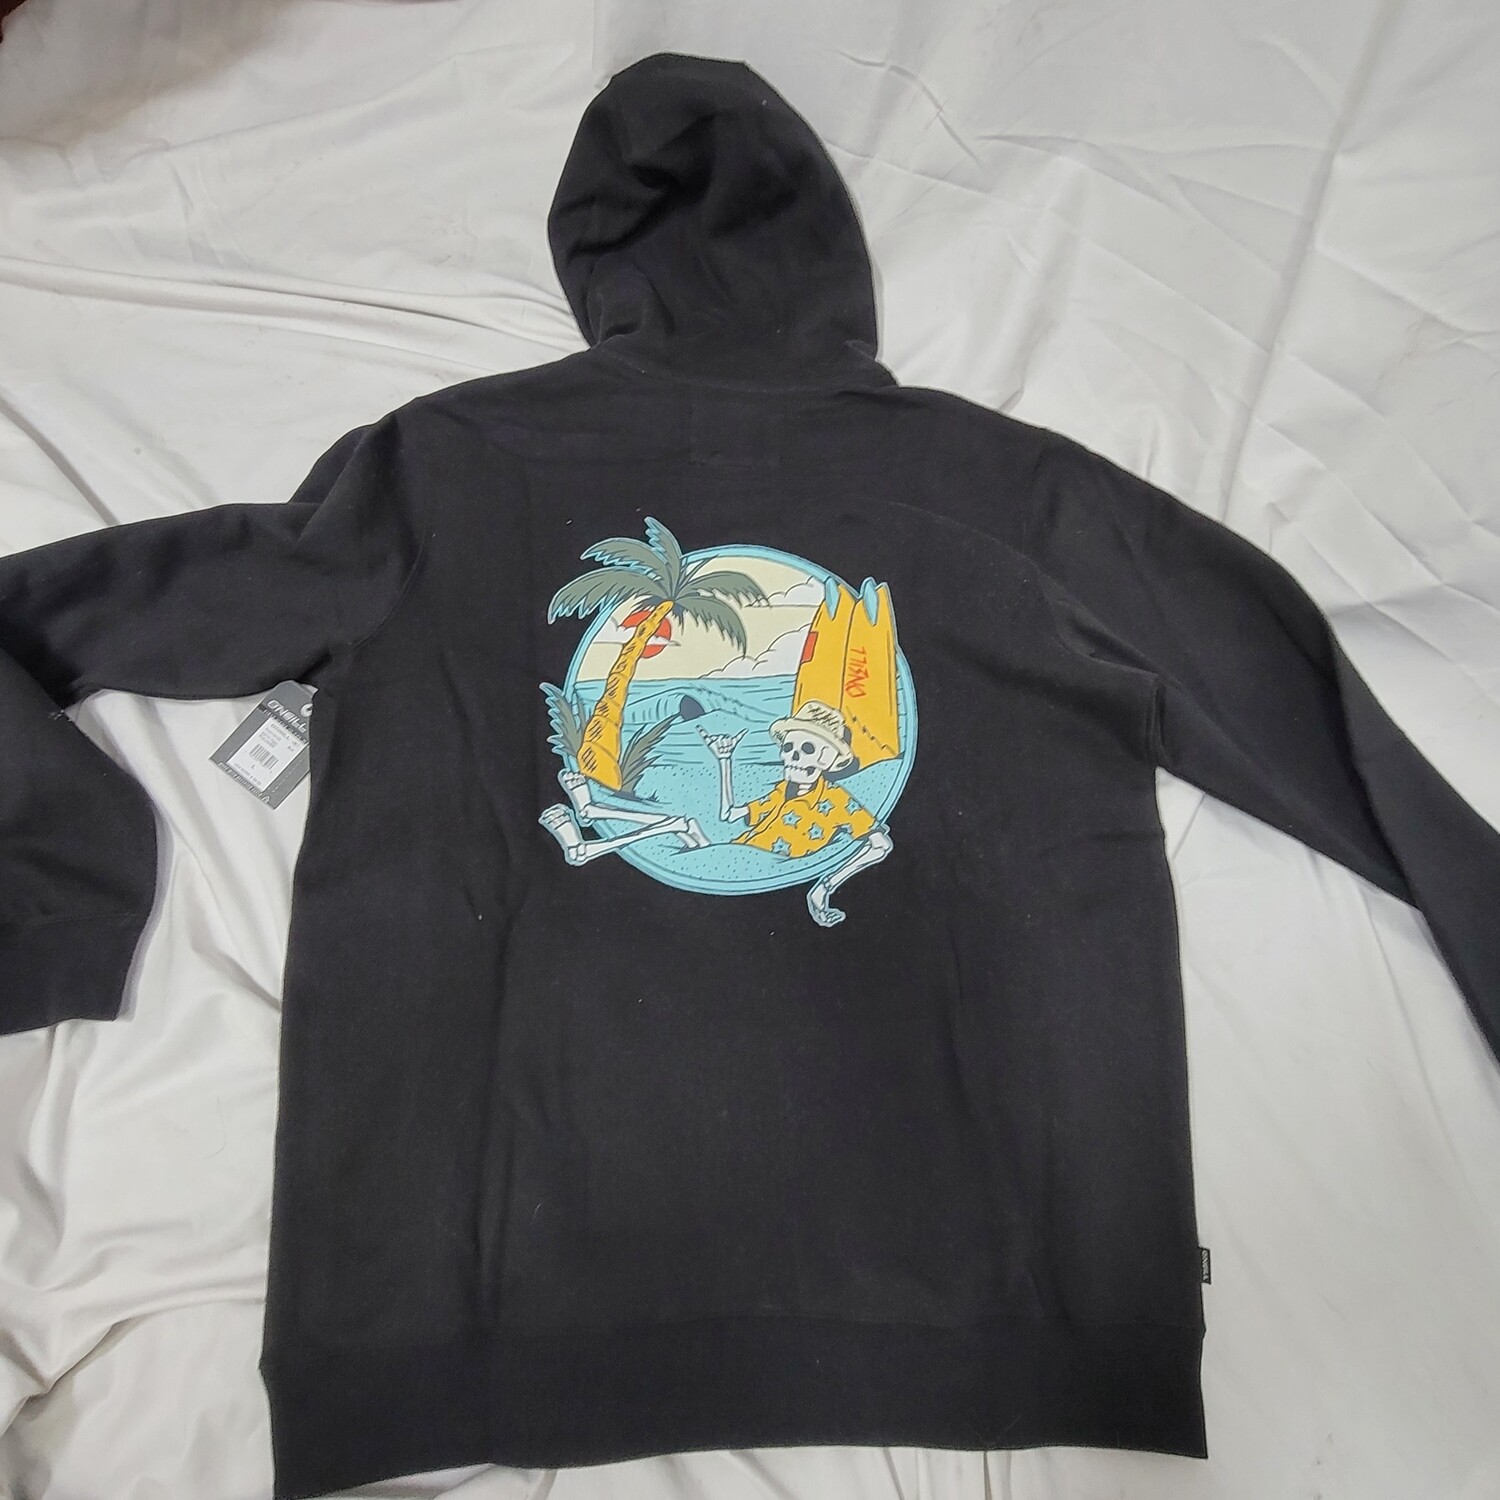 NWT O'Neil 52 Pullover Hoodie 